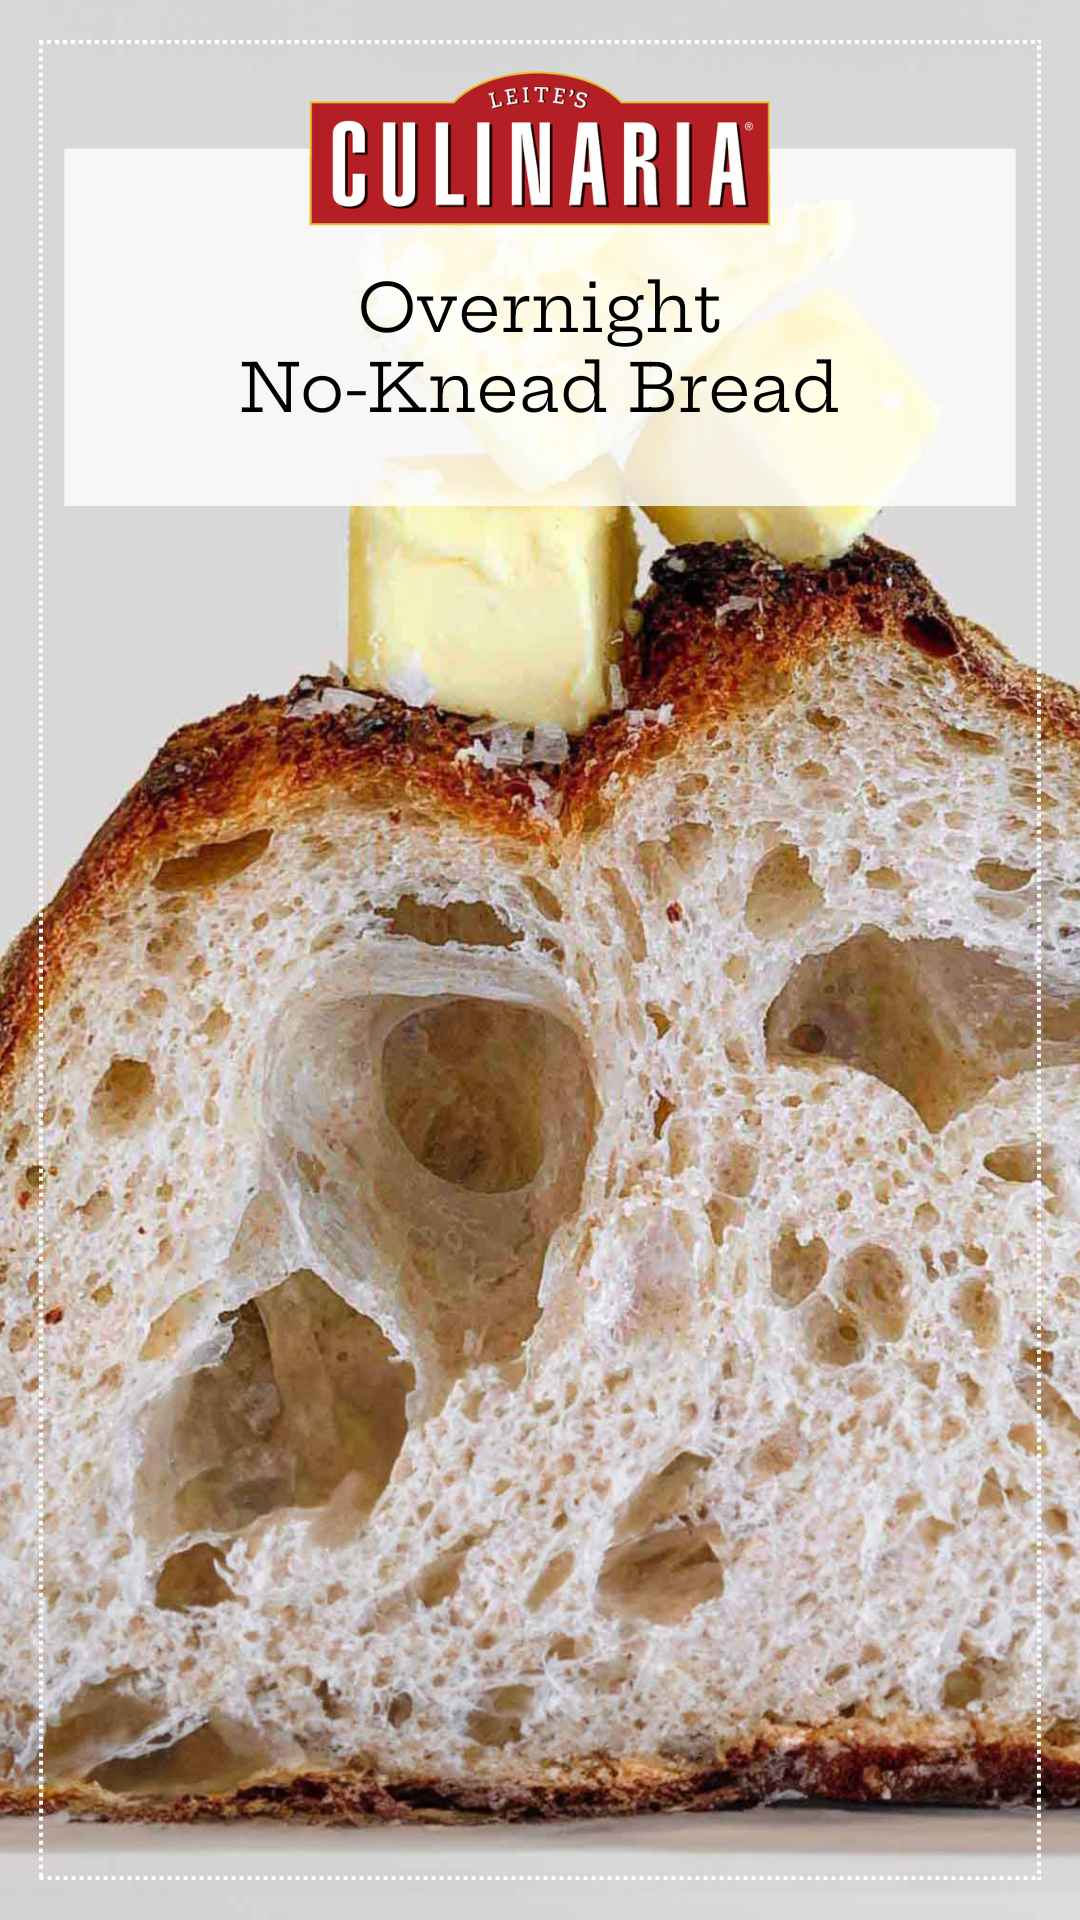 An interior view of a loaf of Jim Lahey's no-knead bread, topped with cubes of butter and flaked salt.